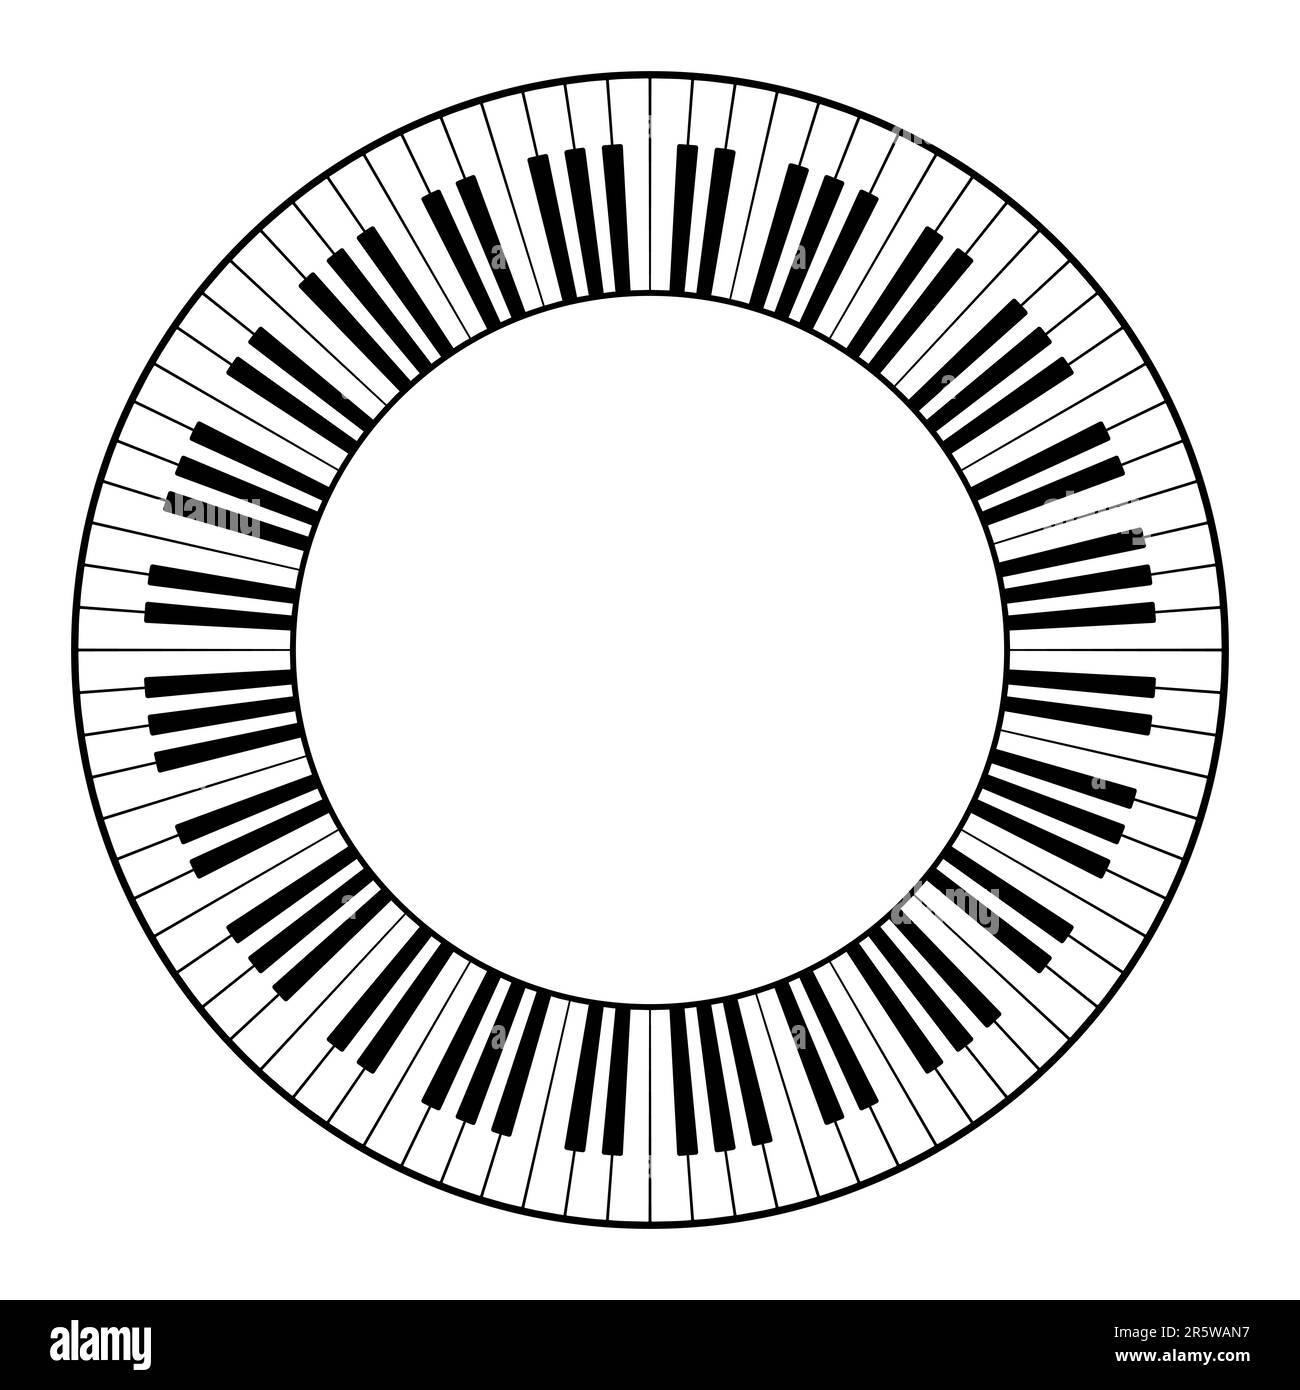 Musical keyboard with twelve octaves, circle frame. Decorative border, constructed from twelve octaves, black and white keys of piano keyboard. Stock Photo